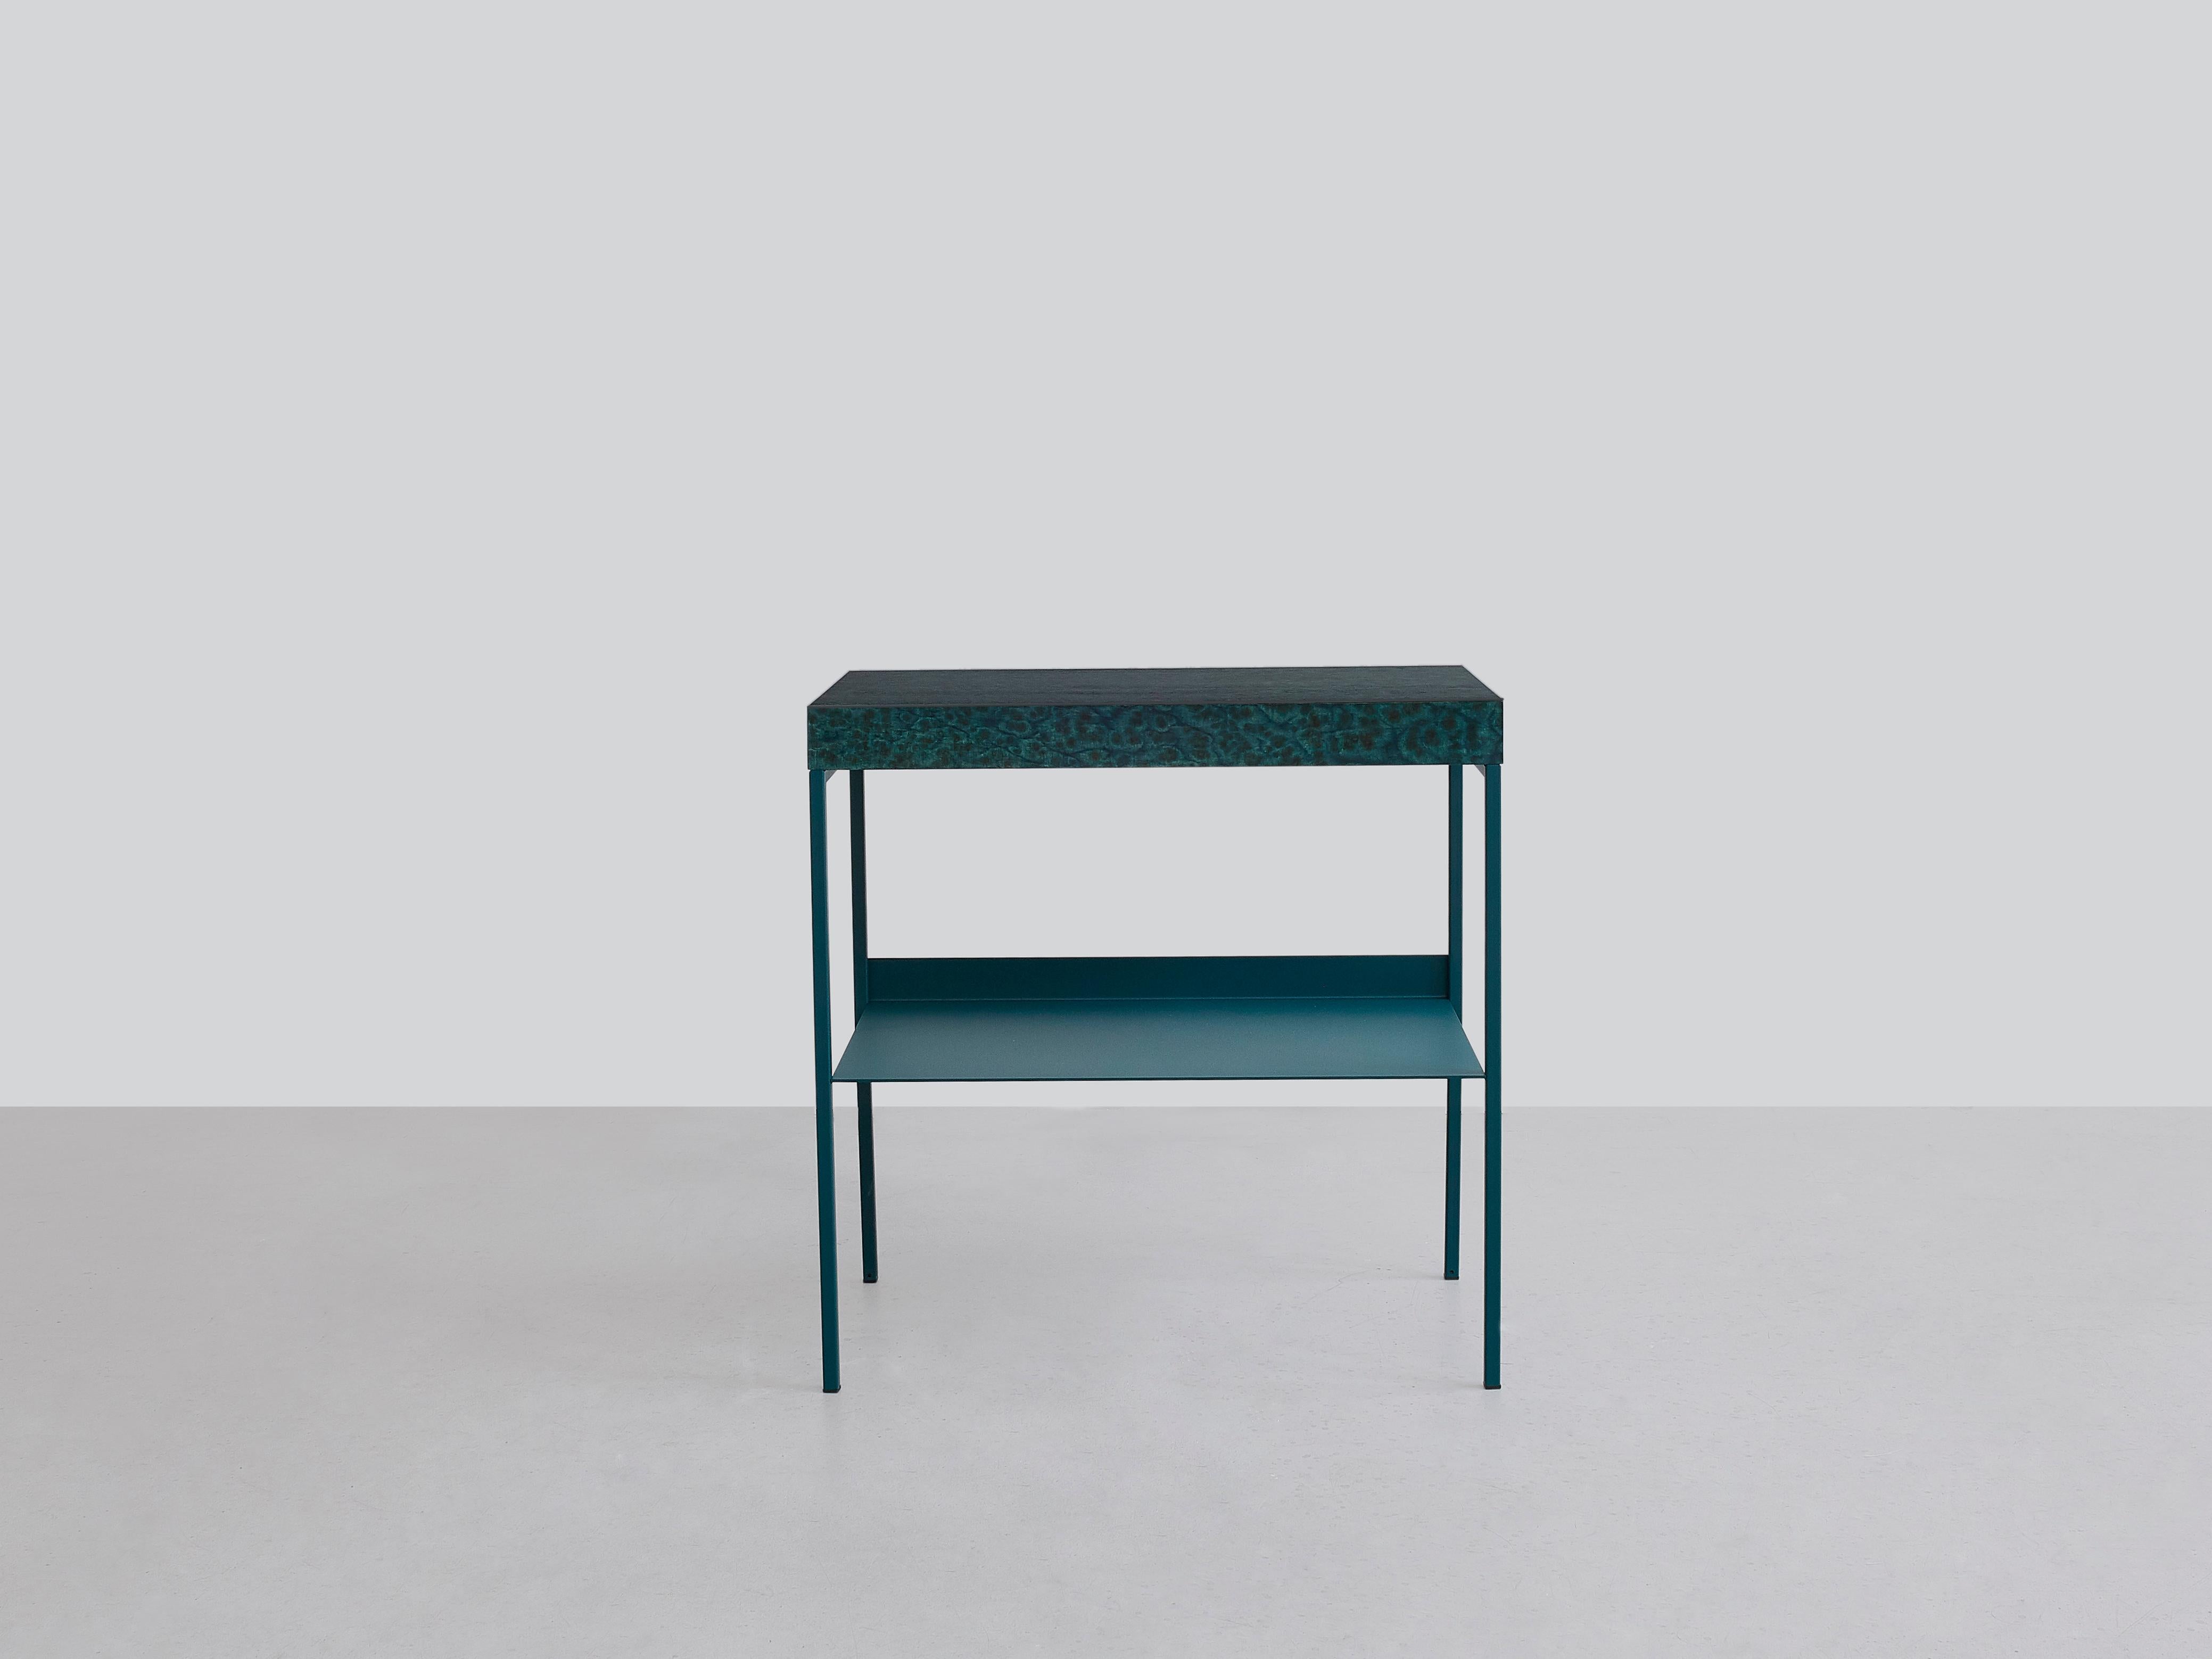 Osis Inga side table by Llot Llov
Dimensions: H 65 x W 66 x D 37 cm
Materials: birch
Finishing: lacquered / powder-coated steel

The surface finish OSIS is an innovation developed by llot llov in Berlin and is 100% handmade.

We transferred